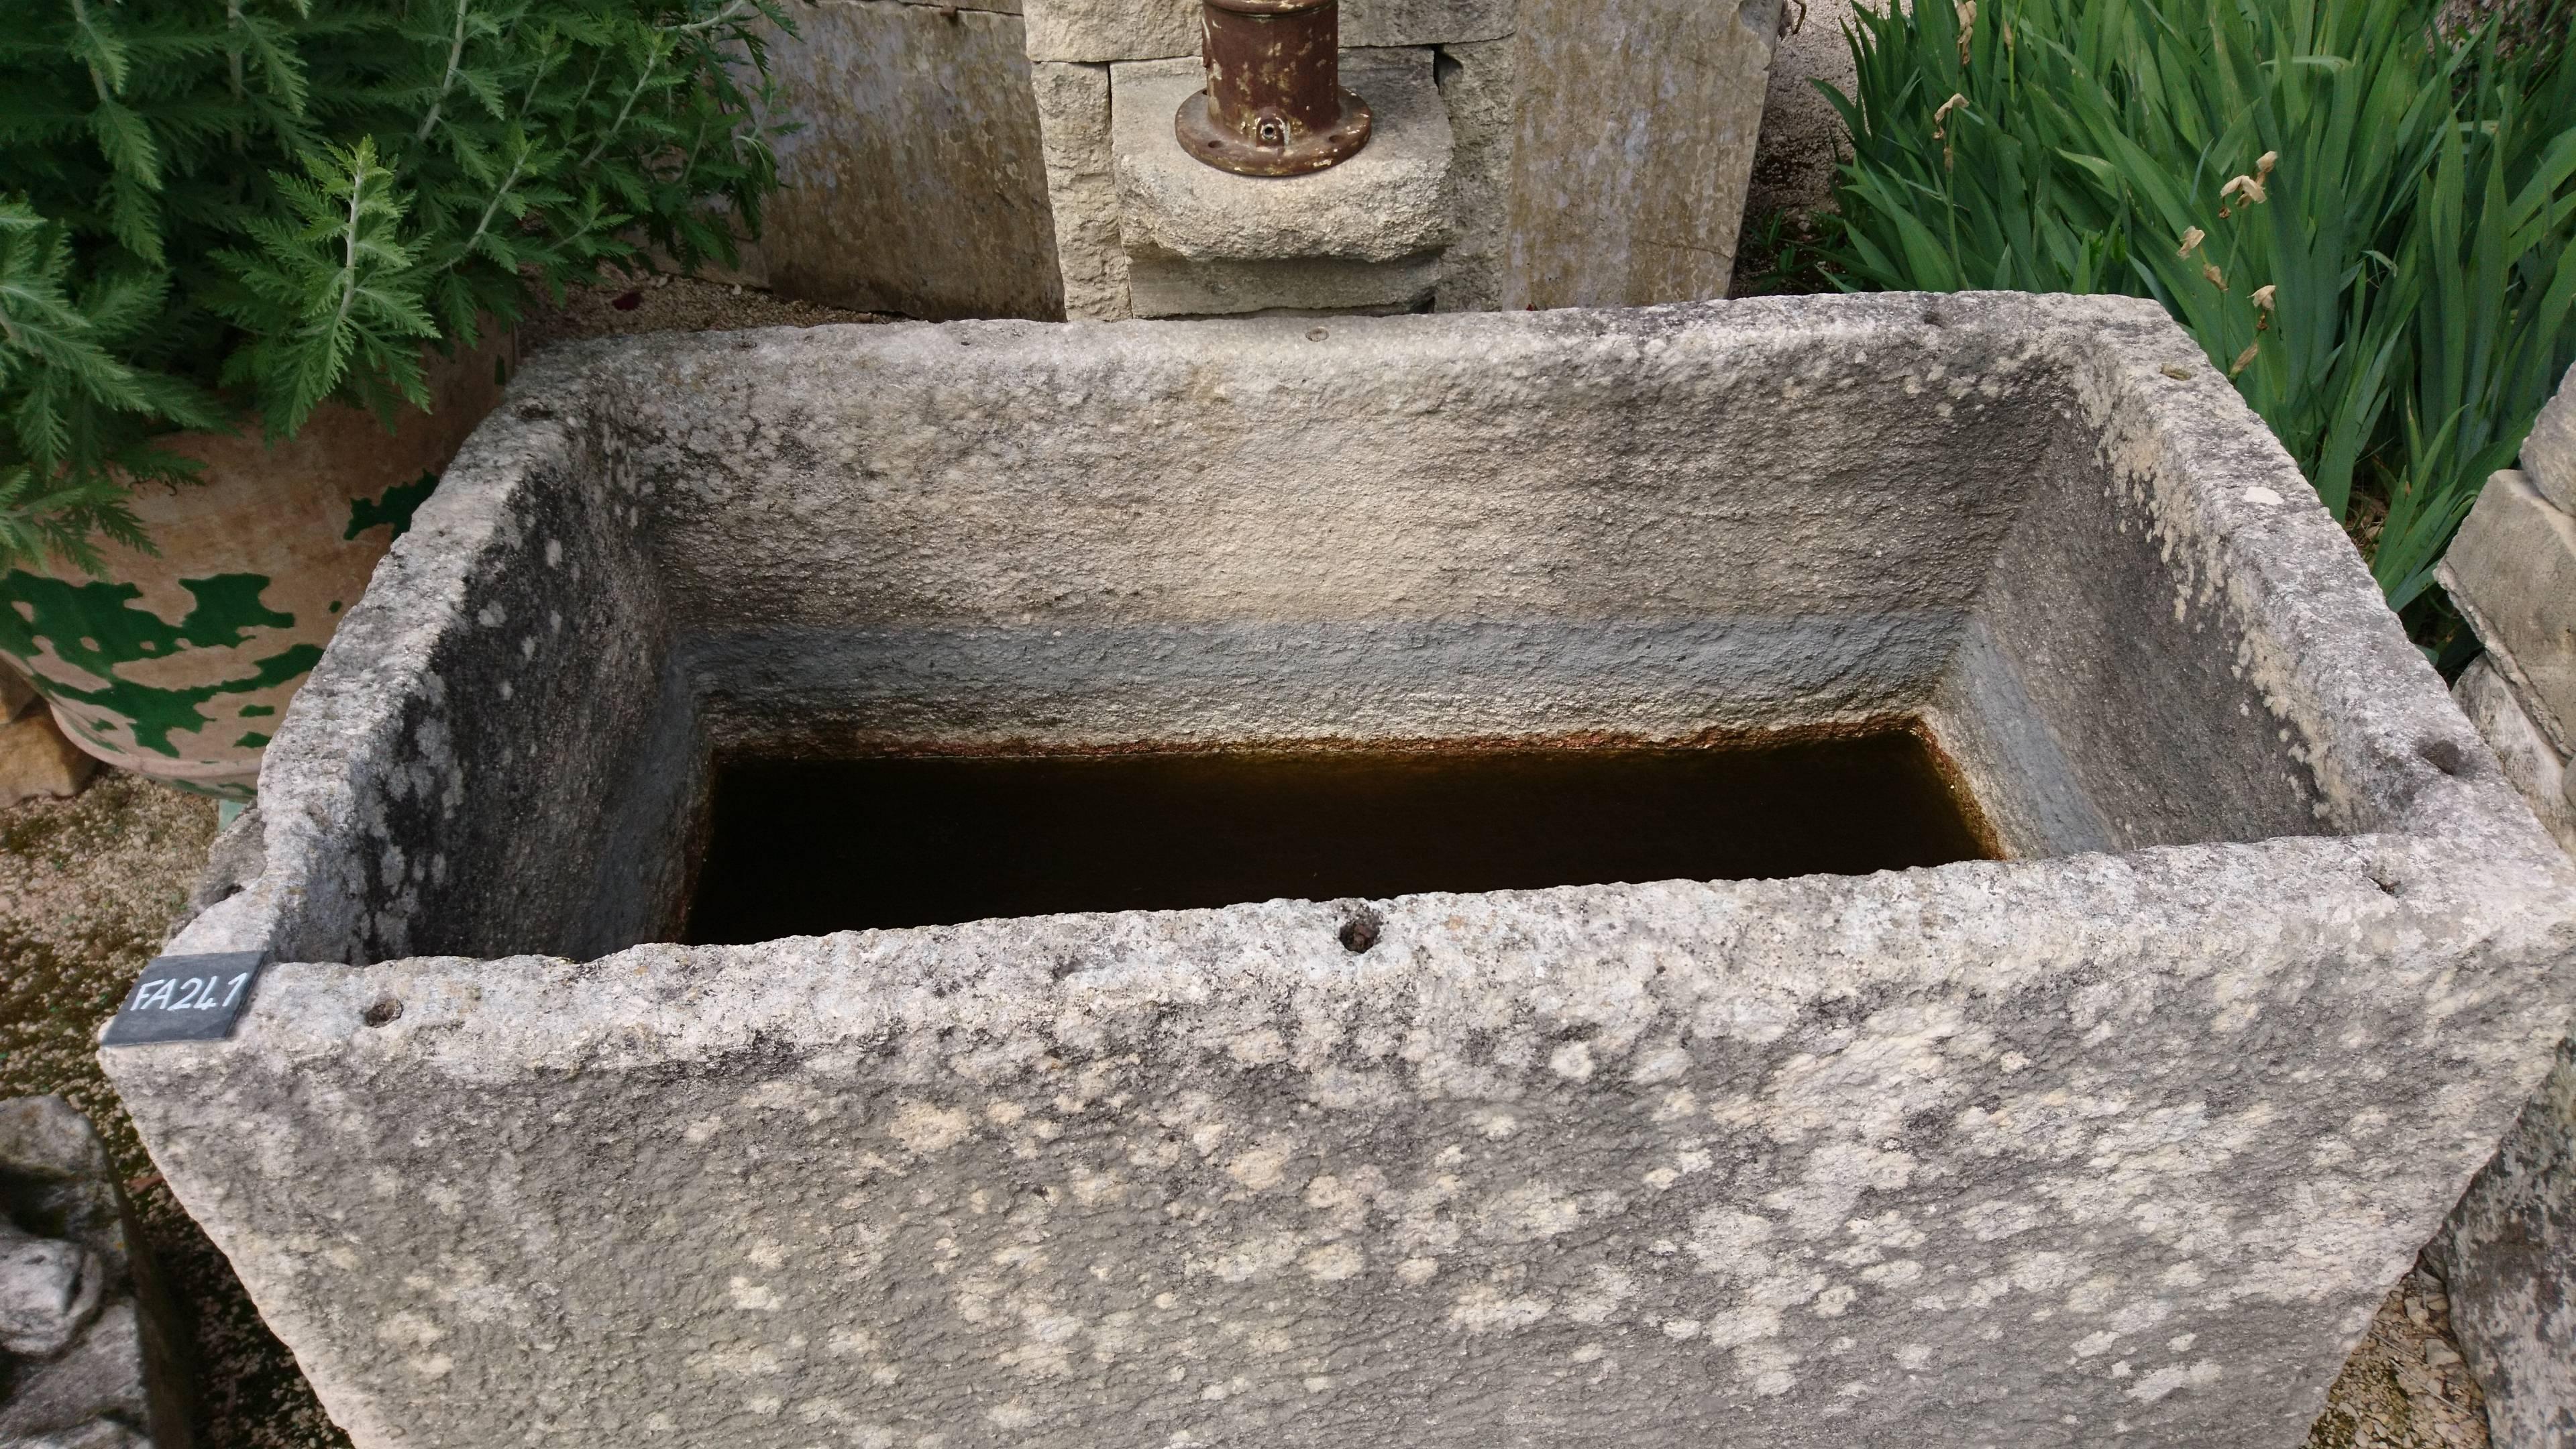 19th Century Antique Wall-Fountain with Ancient Manual Water Pump and Monolith Stone Basin For Sale